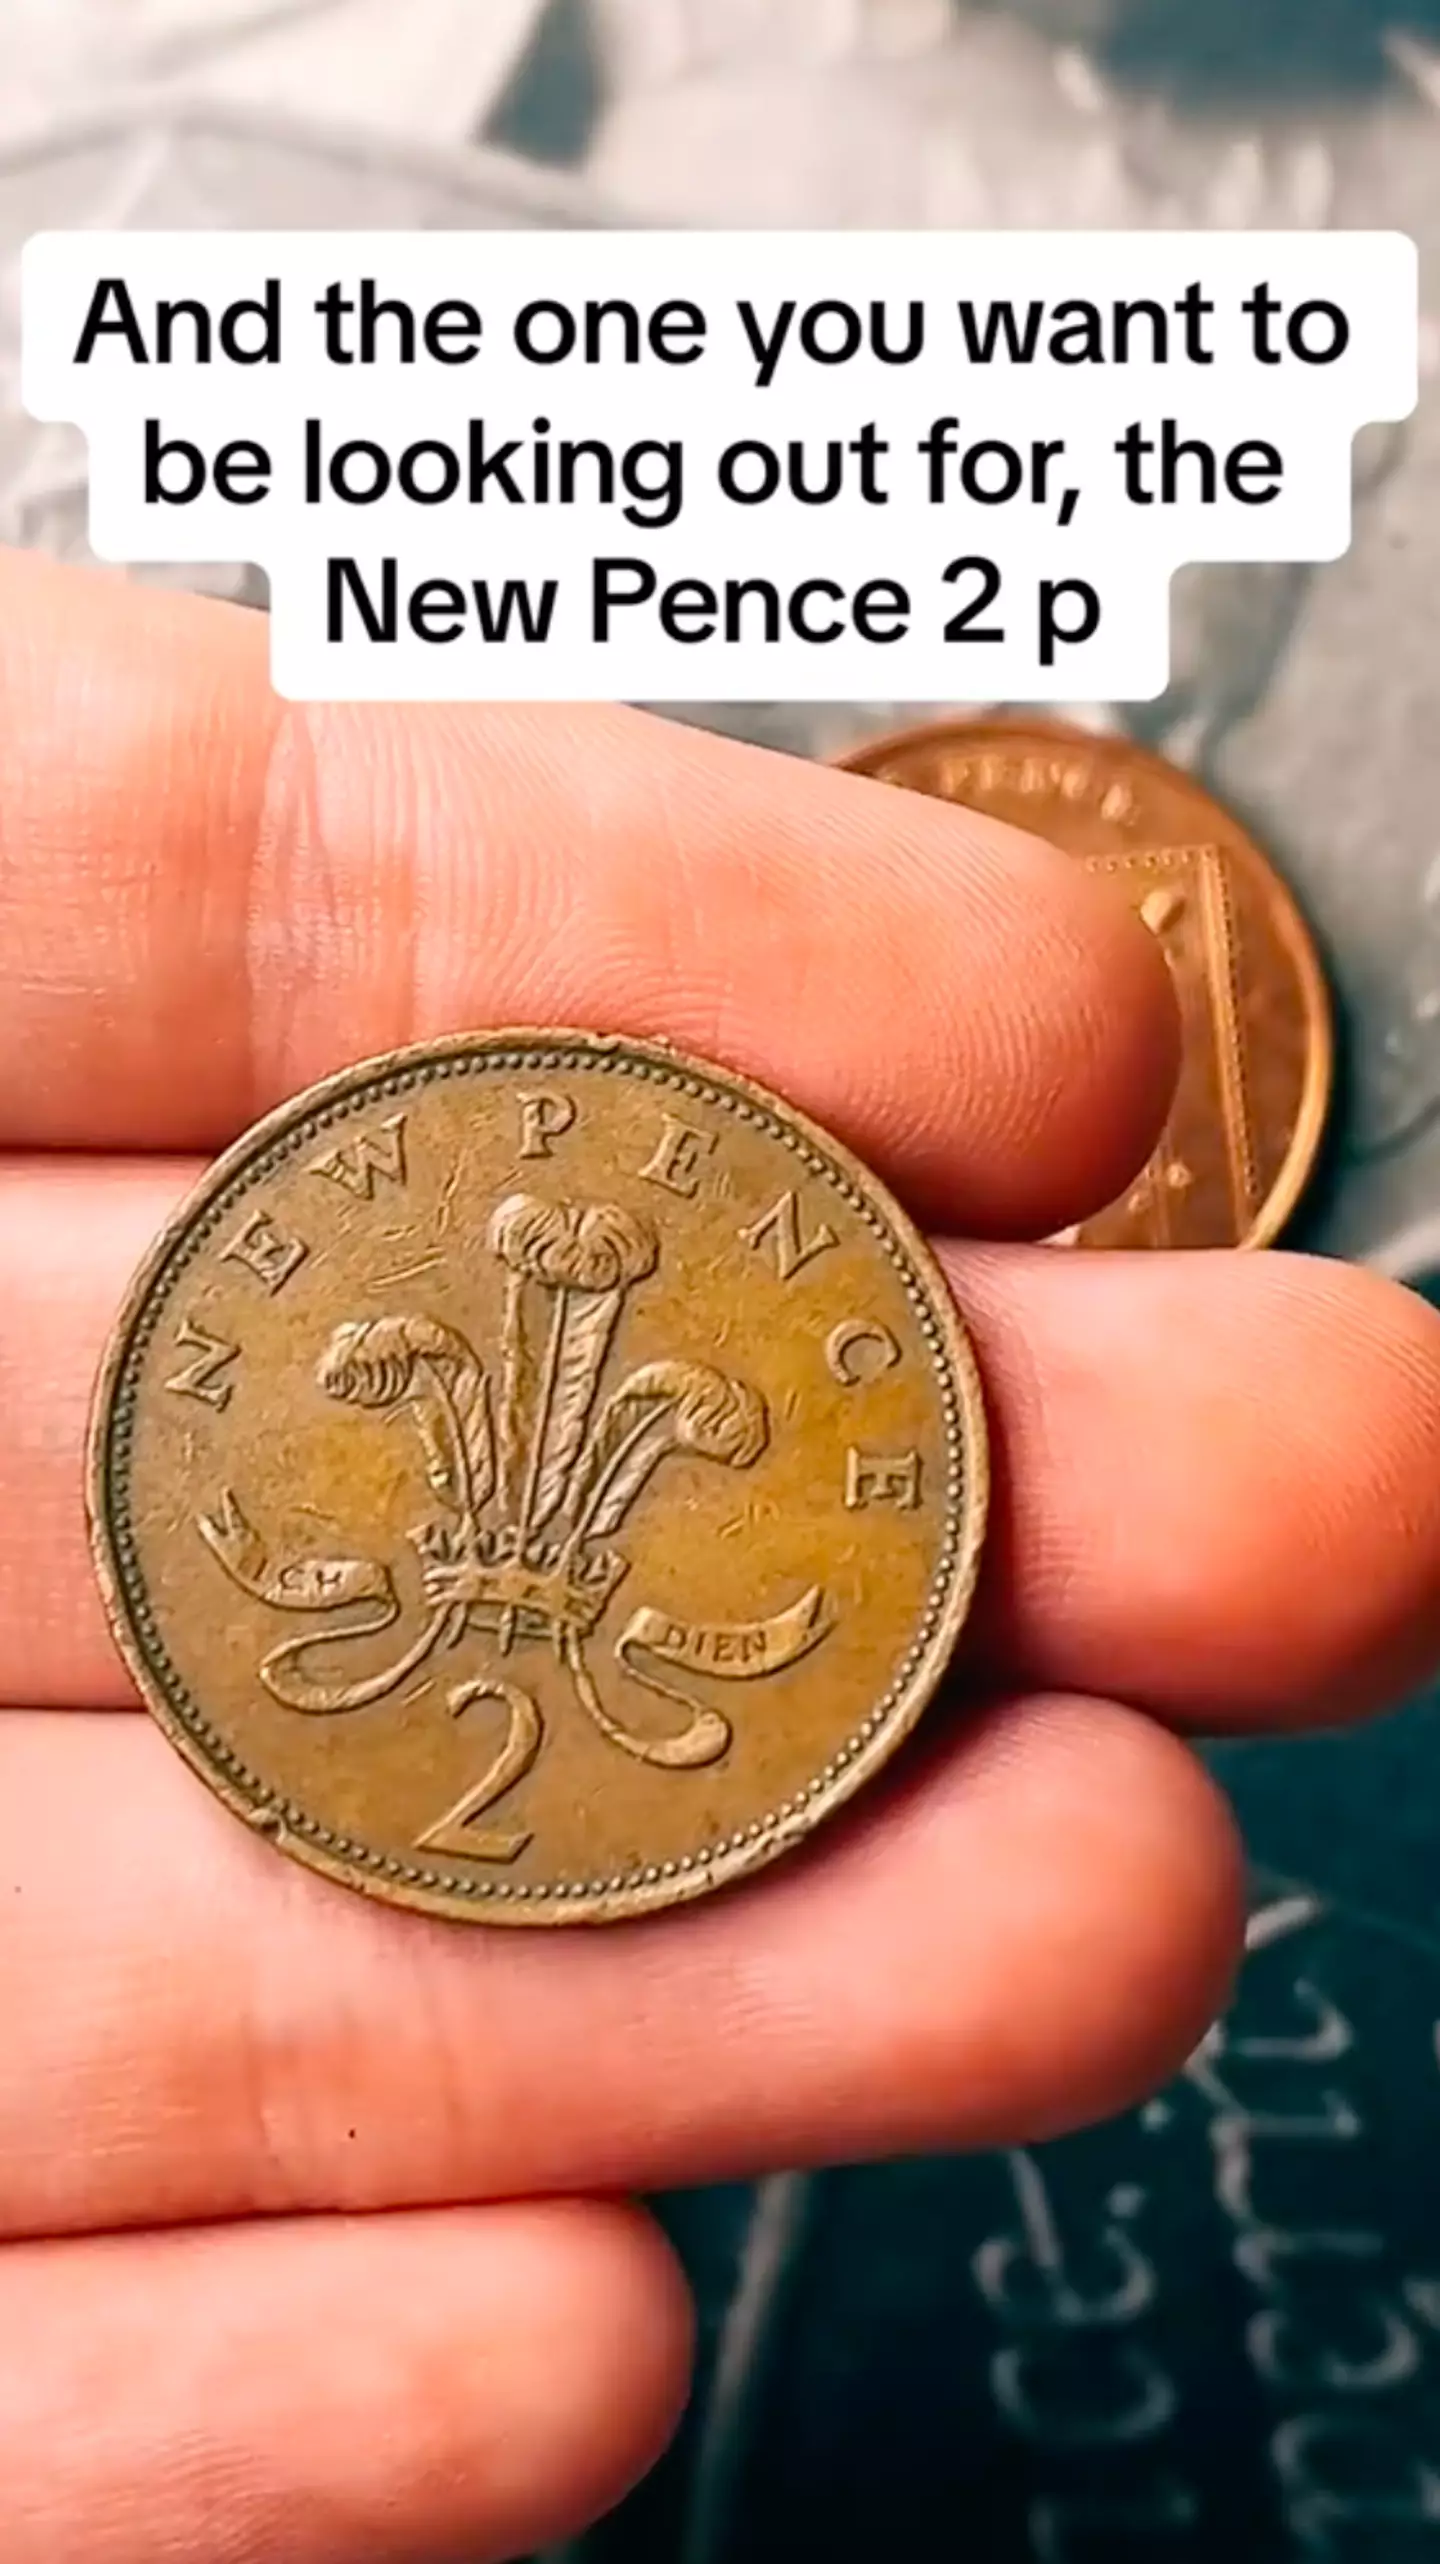 Does this 2p look familiar to you?